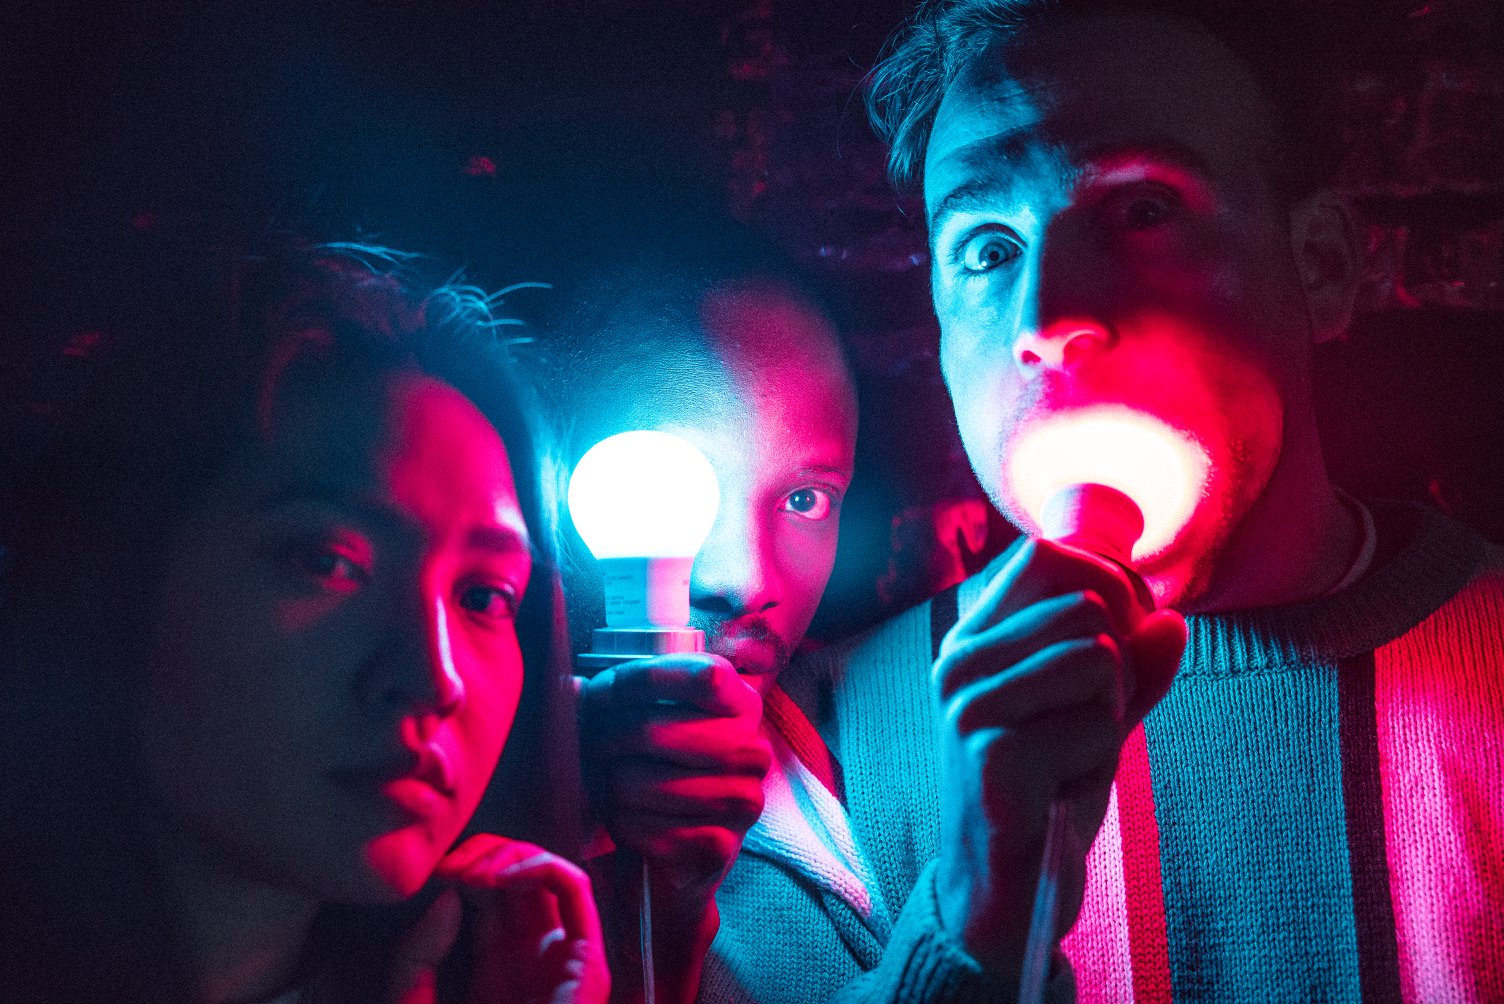 three people in shades of red and blue hold two lightbulbs near their faces